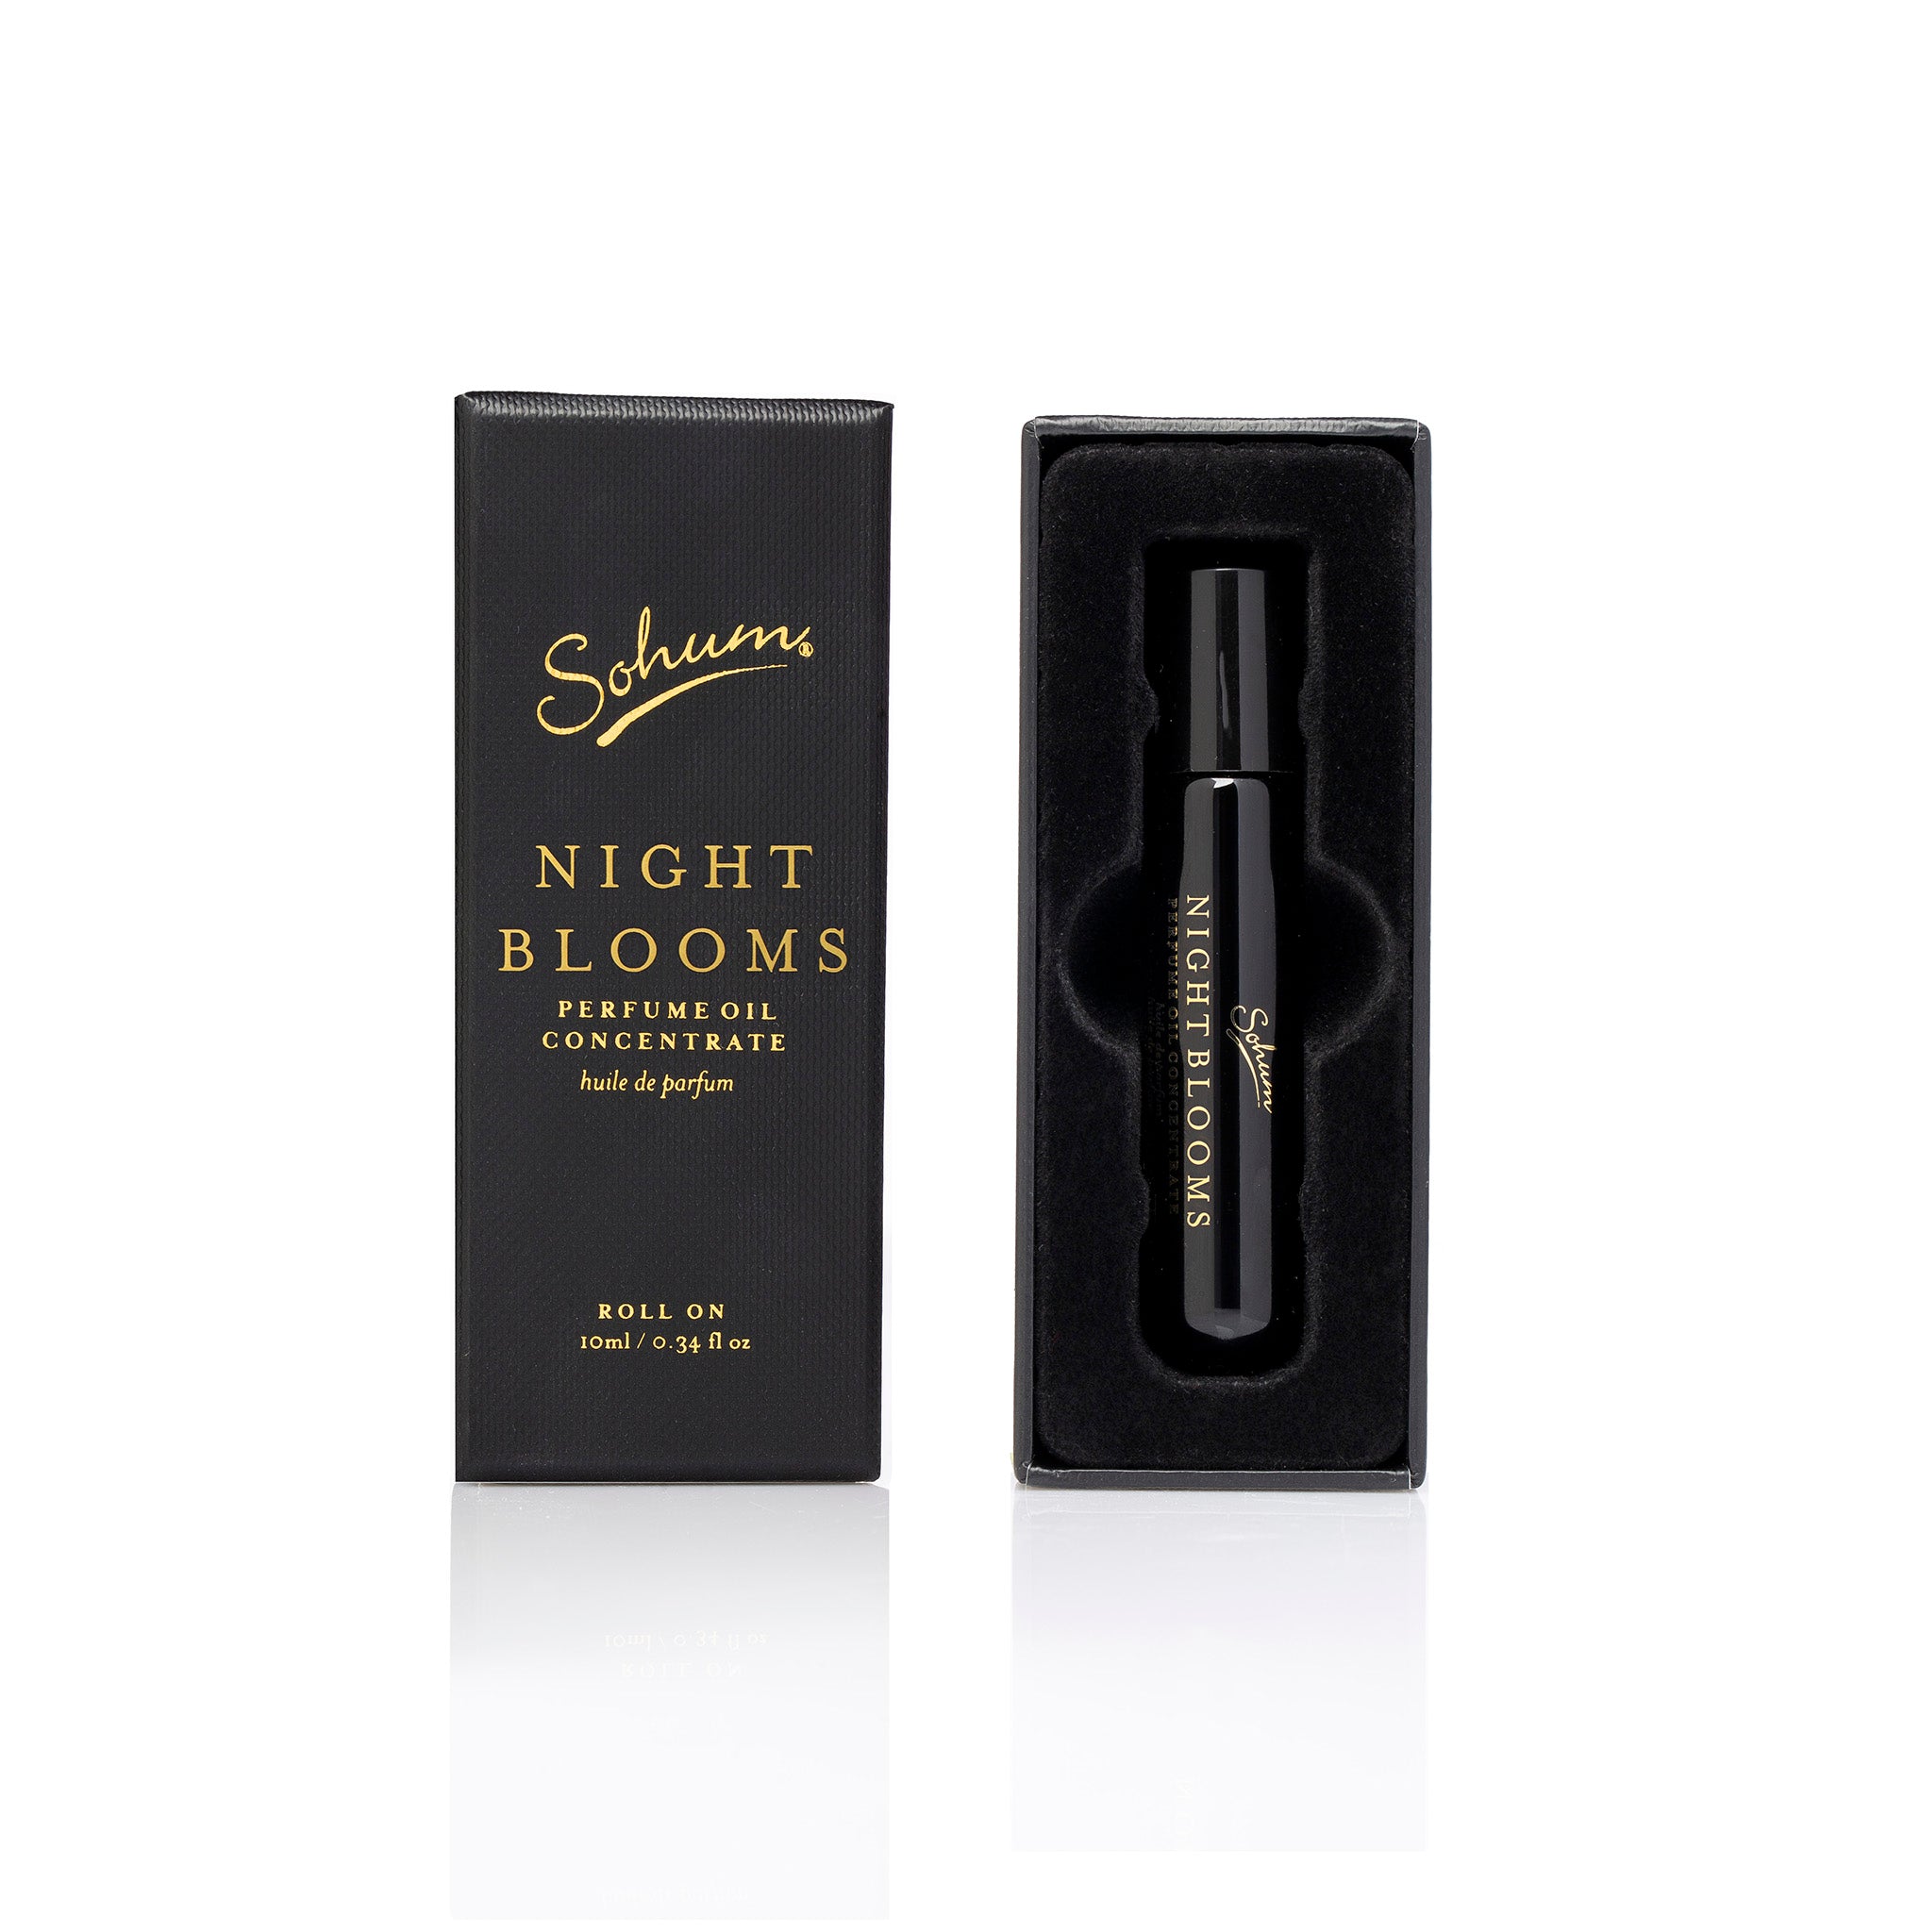 Night Blooms Perfume Oil Concentrate